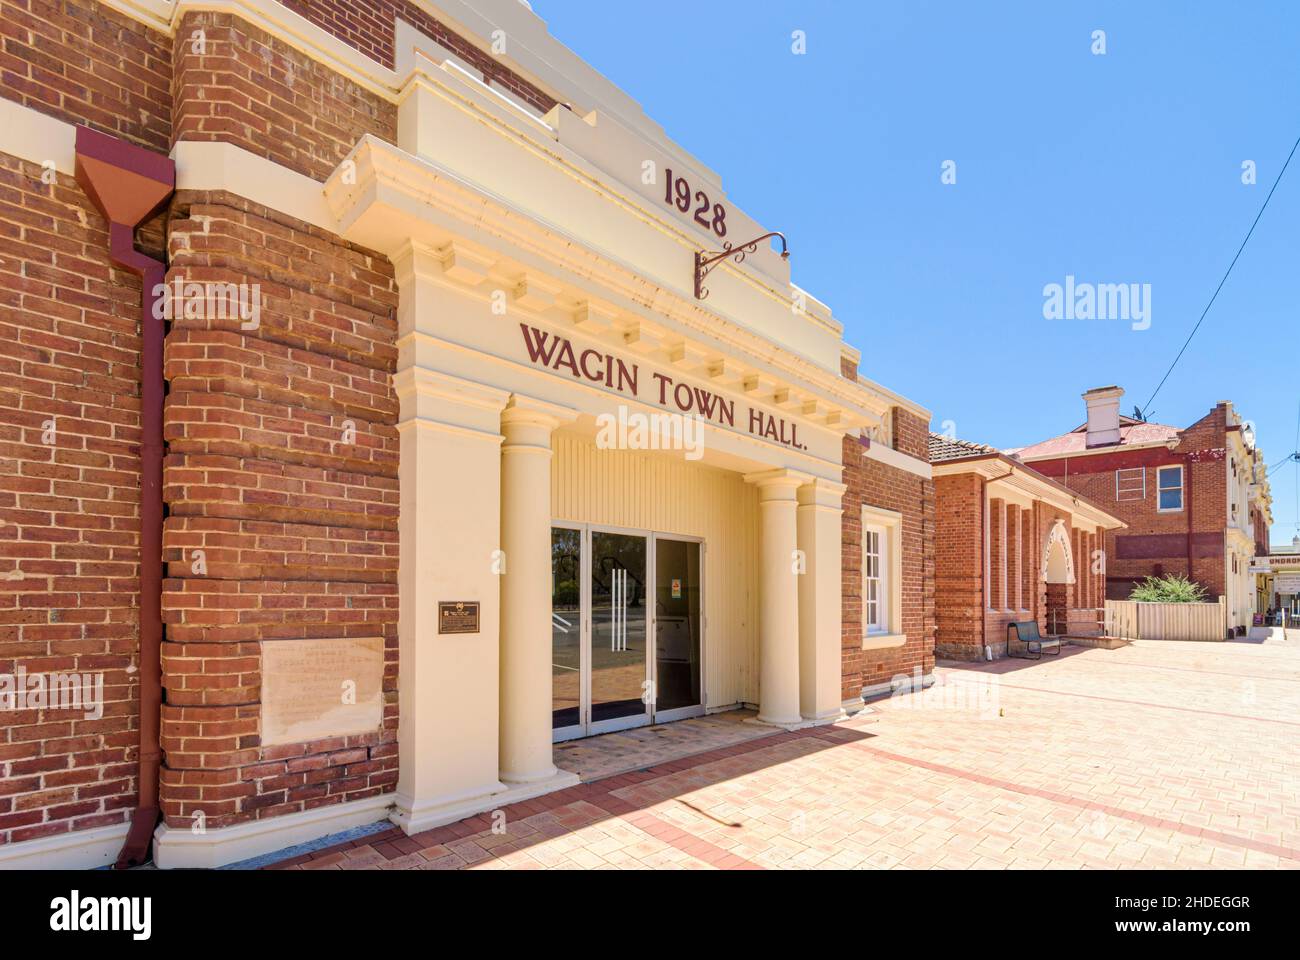 Facade of the Inter-war Free Classical style Wagin Town Hall in the rural country town of Wagin, Western Australia, Australia Stock Photo